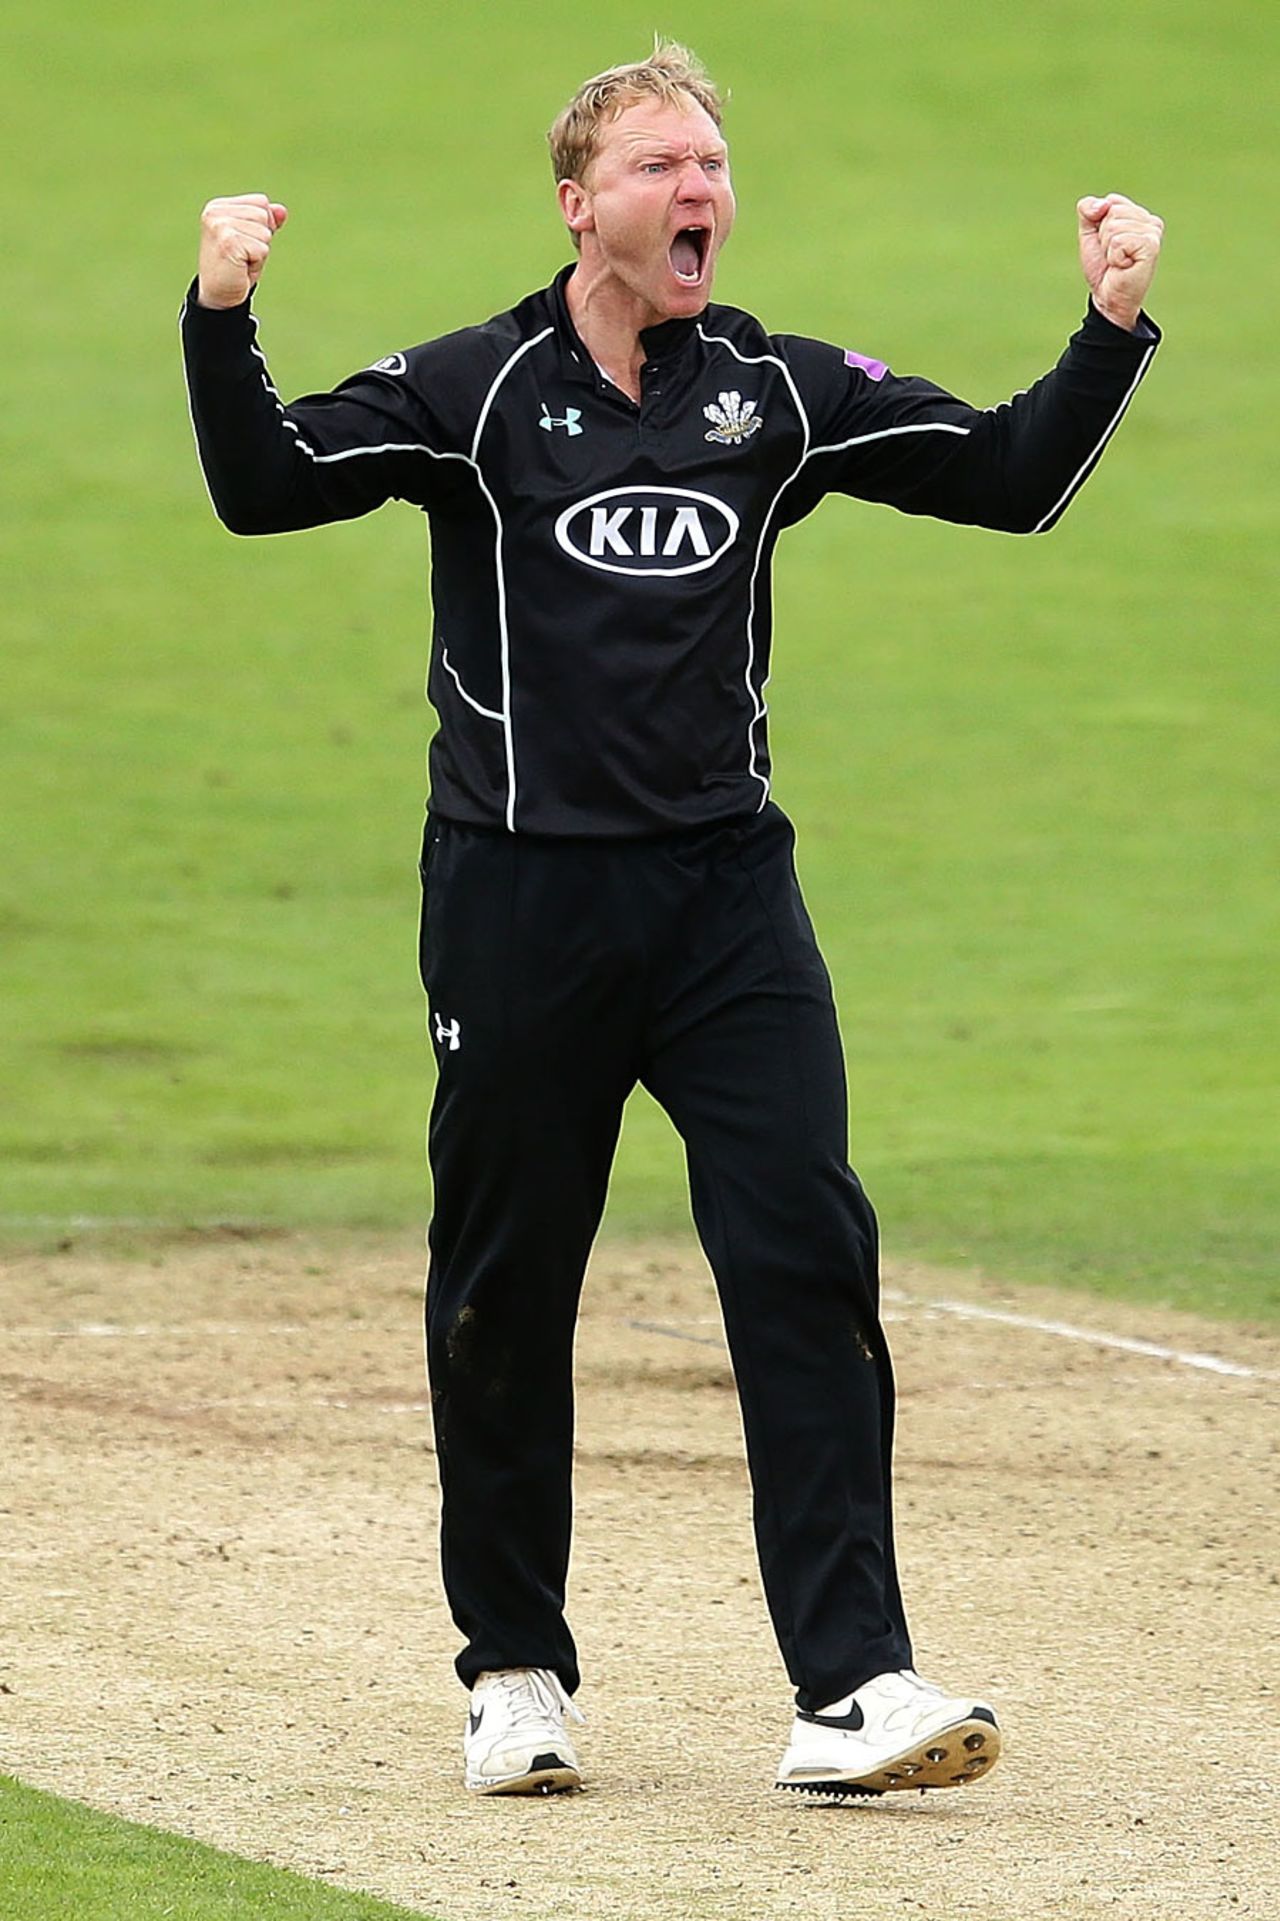 Do you think he's pleased? Gareth Batty celebrates Alex Lees' wicket, Yorkshire v Surrey, Royal London Cup, Semi-final, Headingley, August 28, 2016